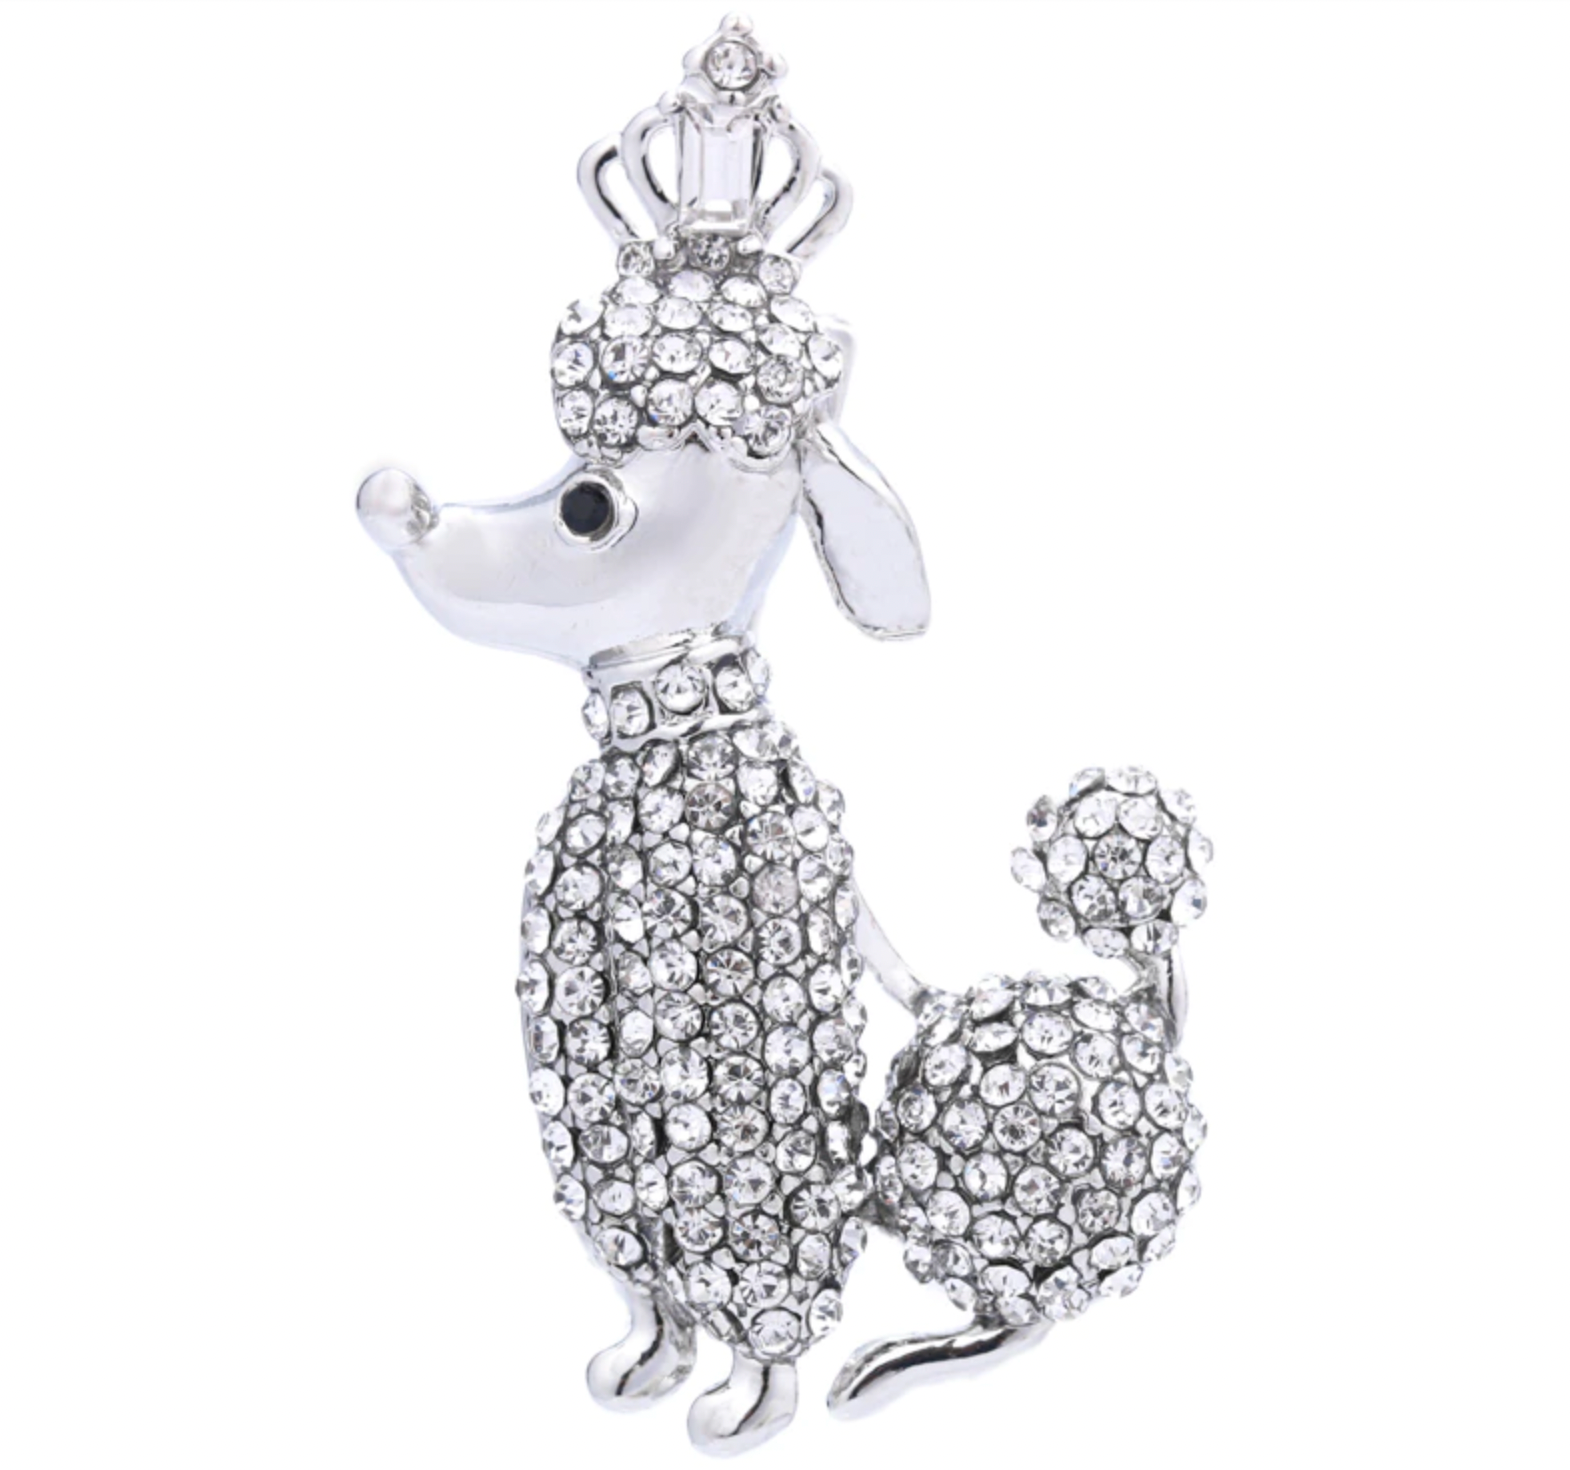 Realistic Poodle brooches - Style's Bug 2 x Silver Queen brooches